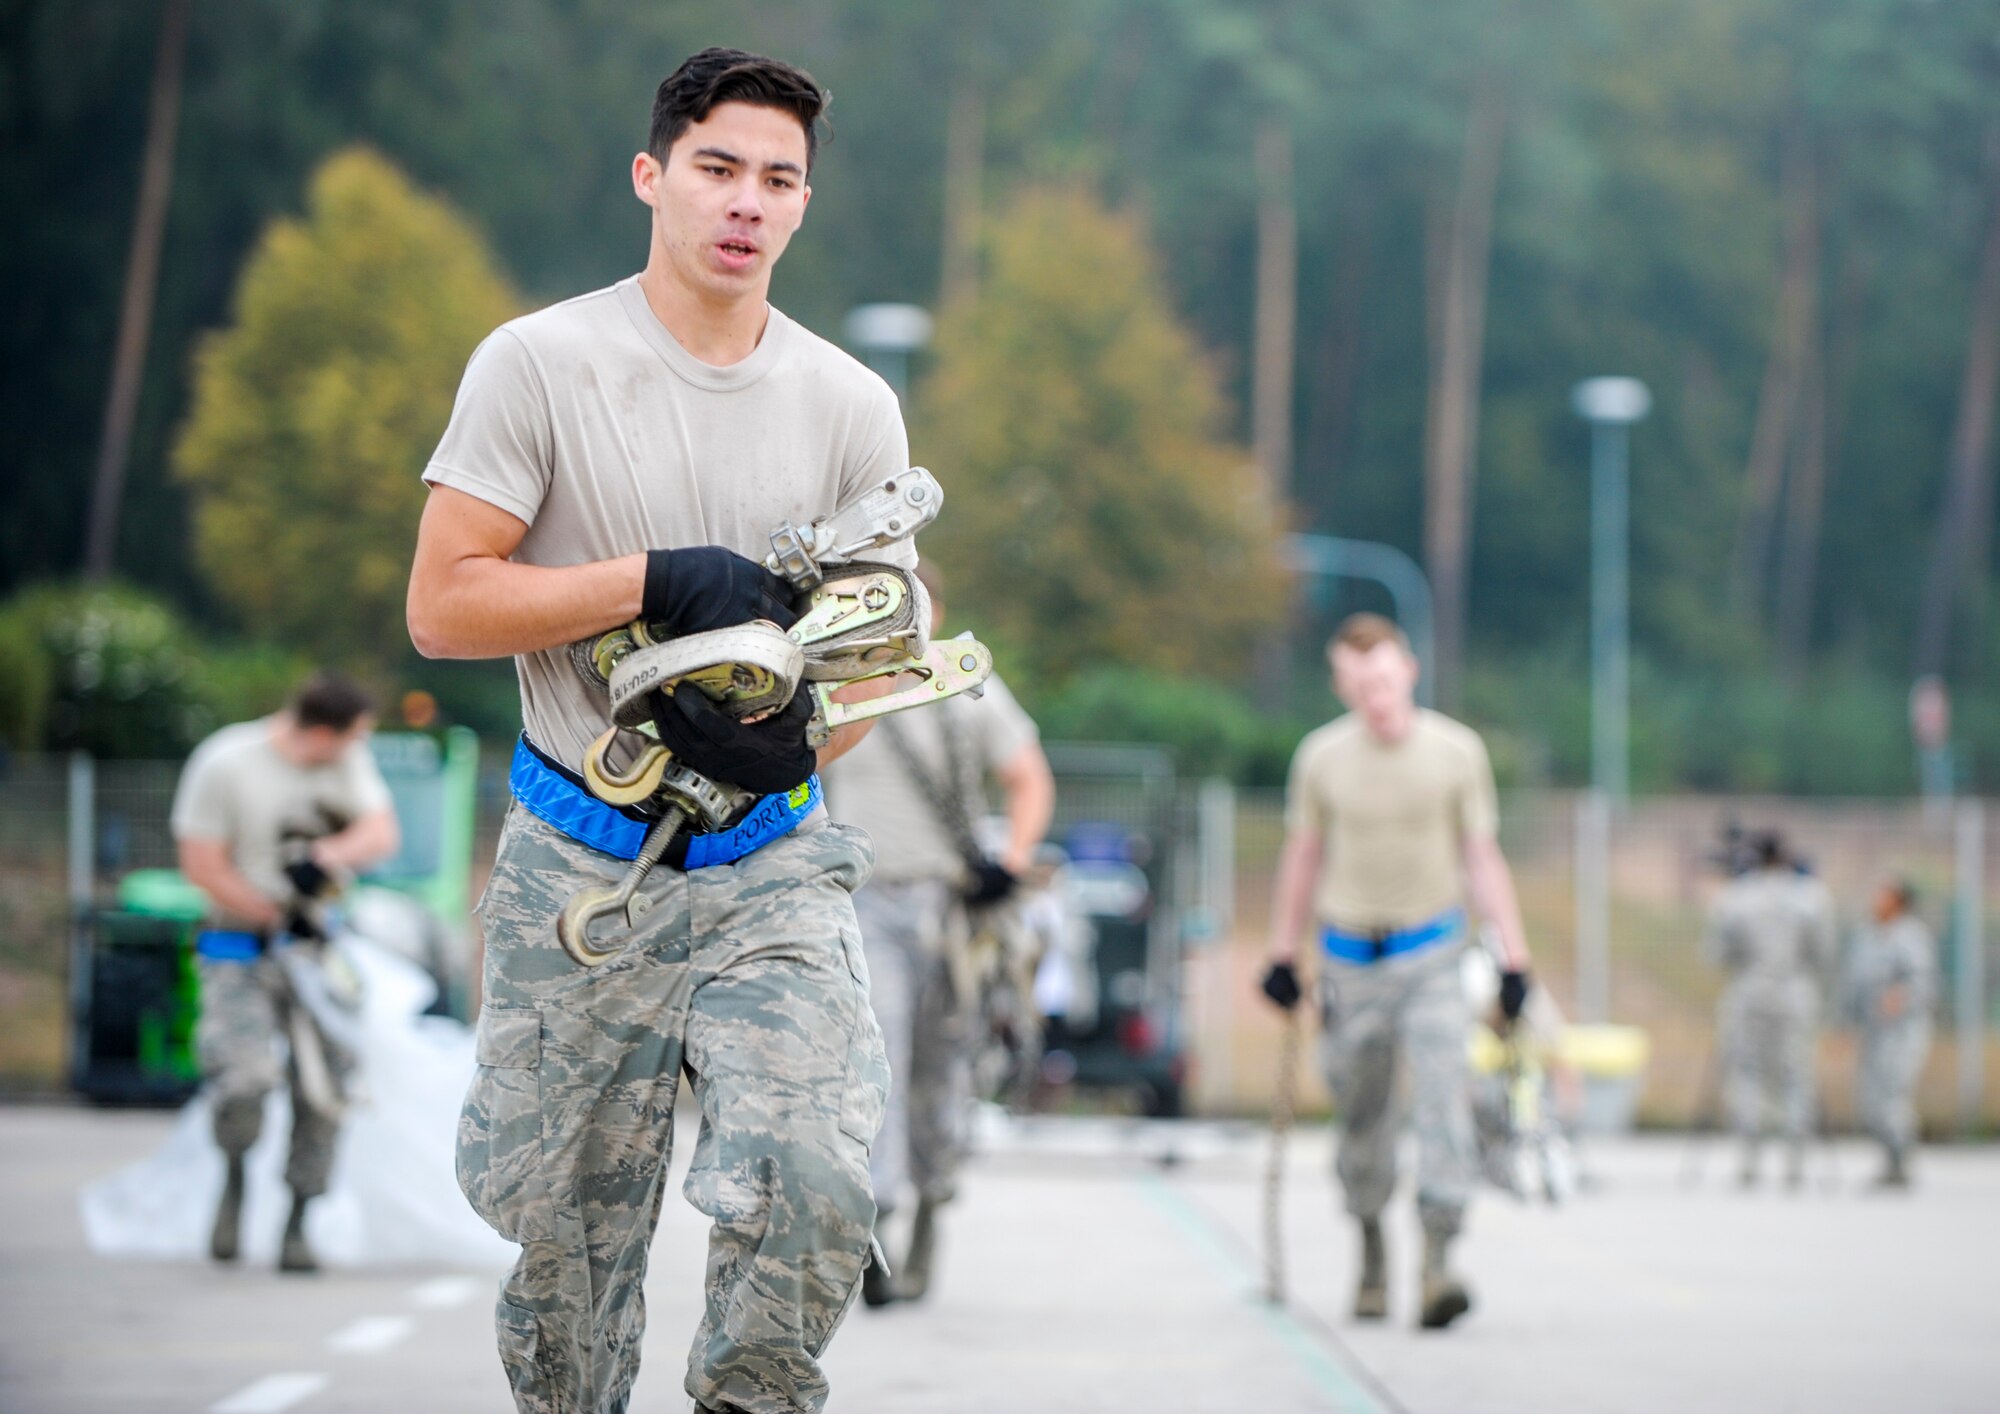 Airman 1st Class Tommy Huynh, 721st Aerial Port Squadron cargo processing specialist, carries ratchet straps during the physical challenge obstacle course of the 2016 European Port Dawg Rodeo Sept. 17, 2016, at Ramstein Air Base, Germany.  For the course, Airmen had to unload a pallet, move the items and the pallet approximately 100 yards away, rebuild the pallet and run a relay around an apron. (U.S. Air Force photo/Staff Sgt. Timothy Moore)